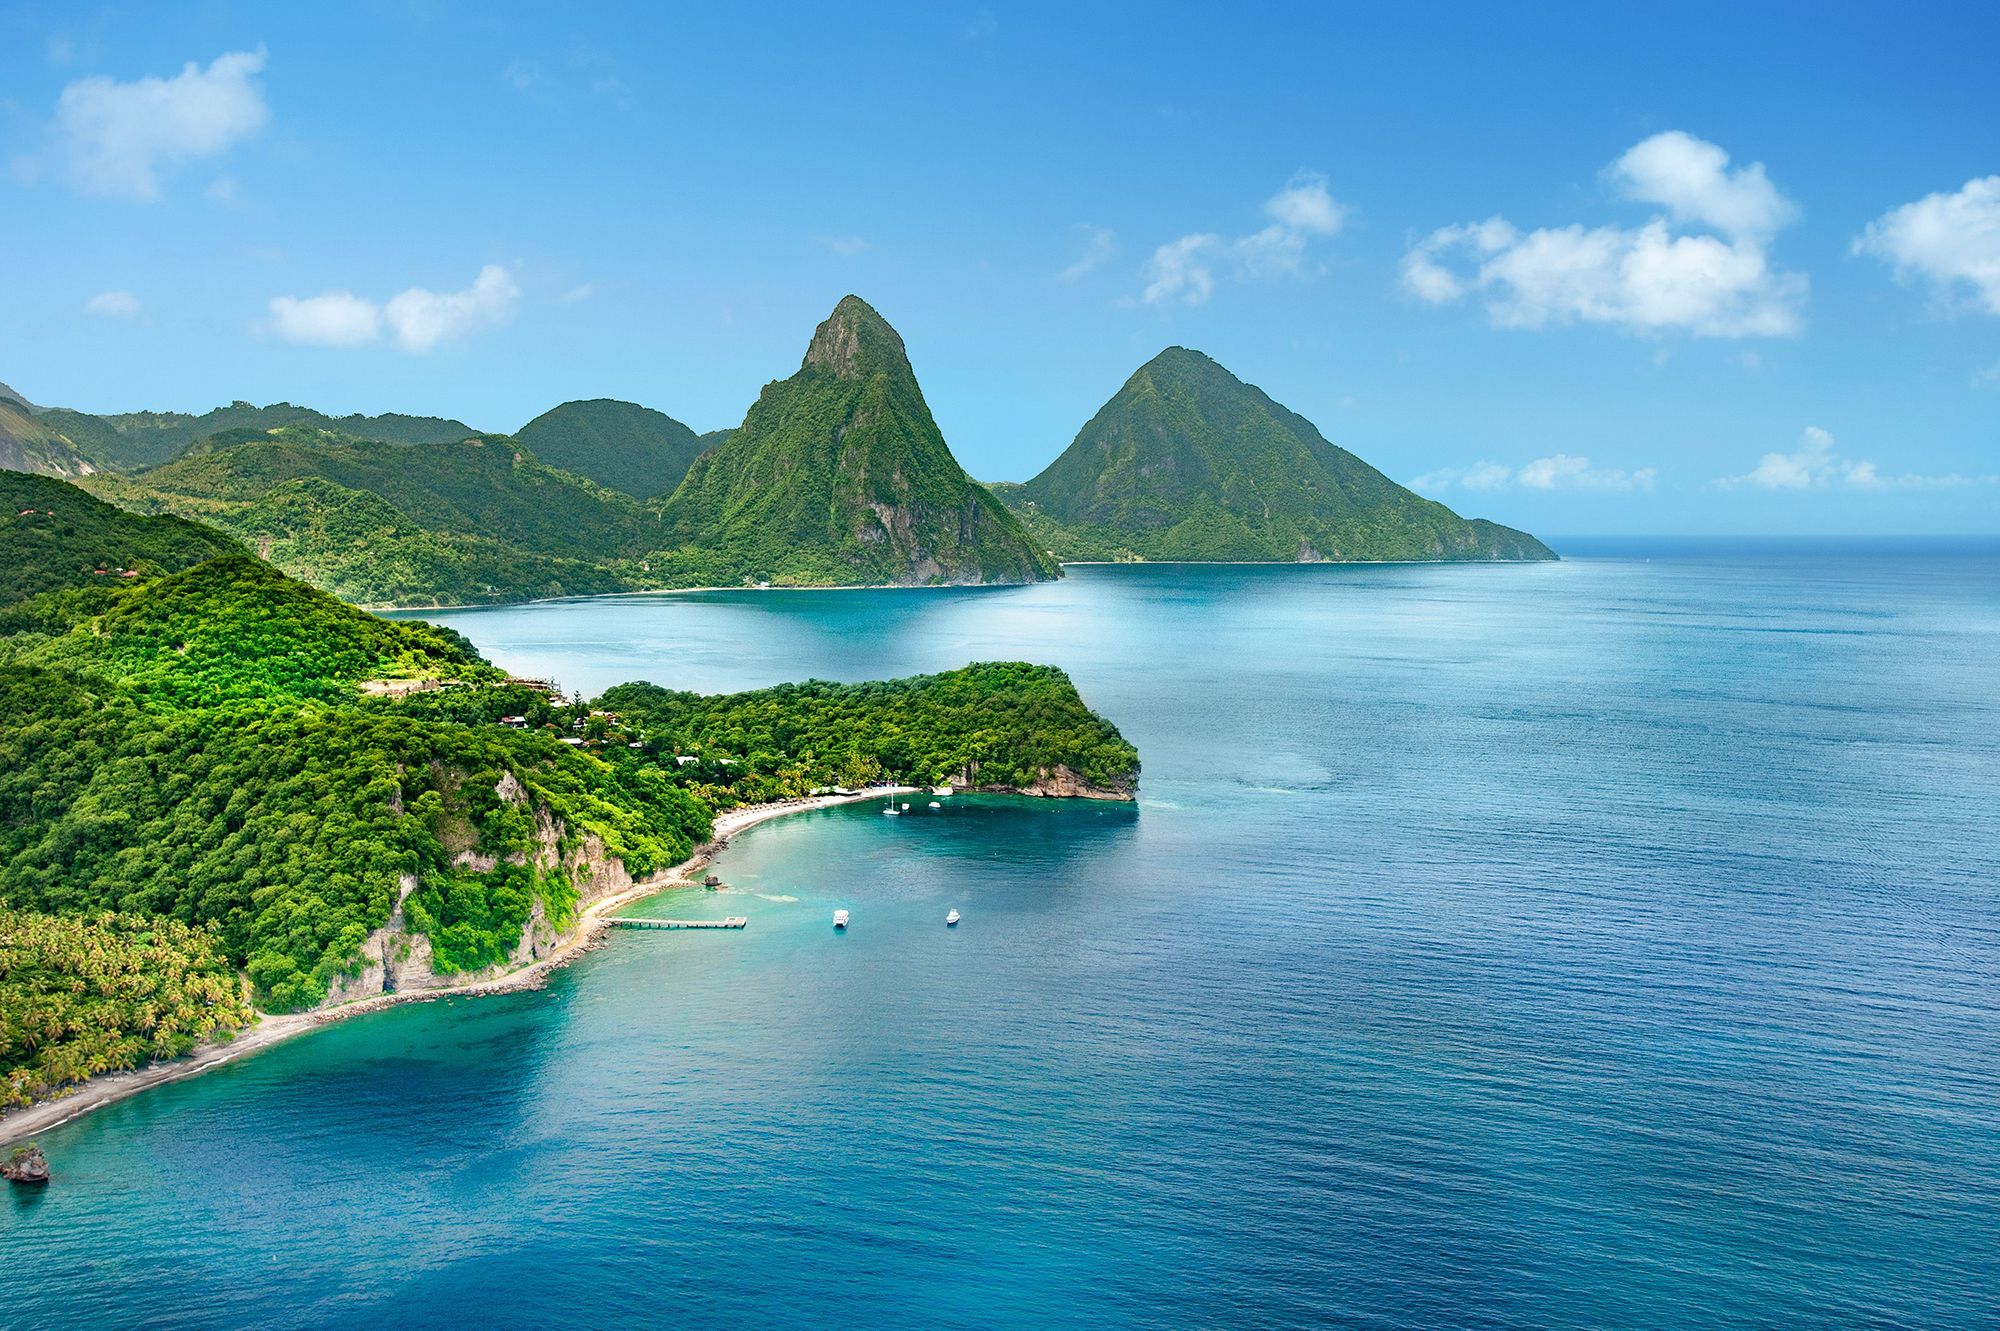 St. Lucia - Pictures